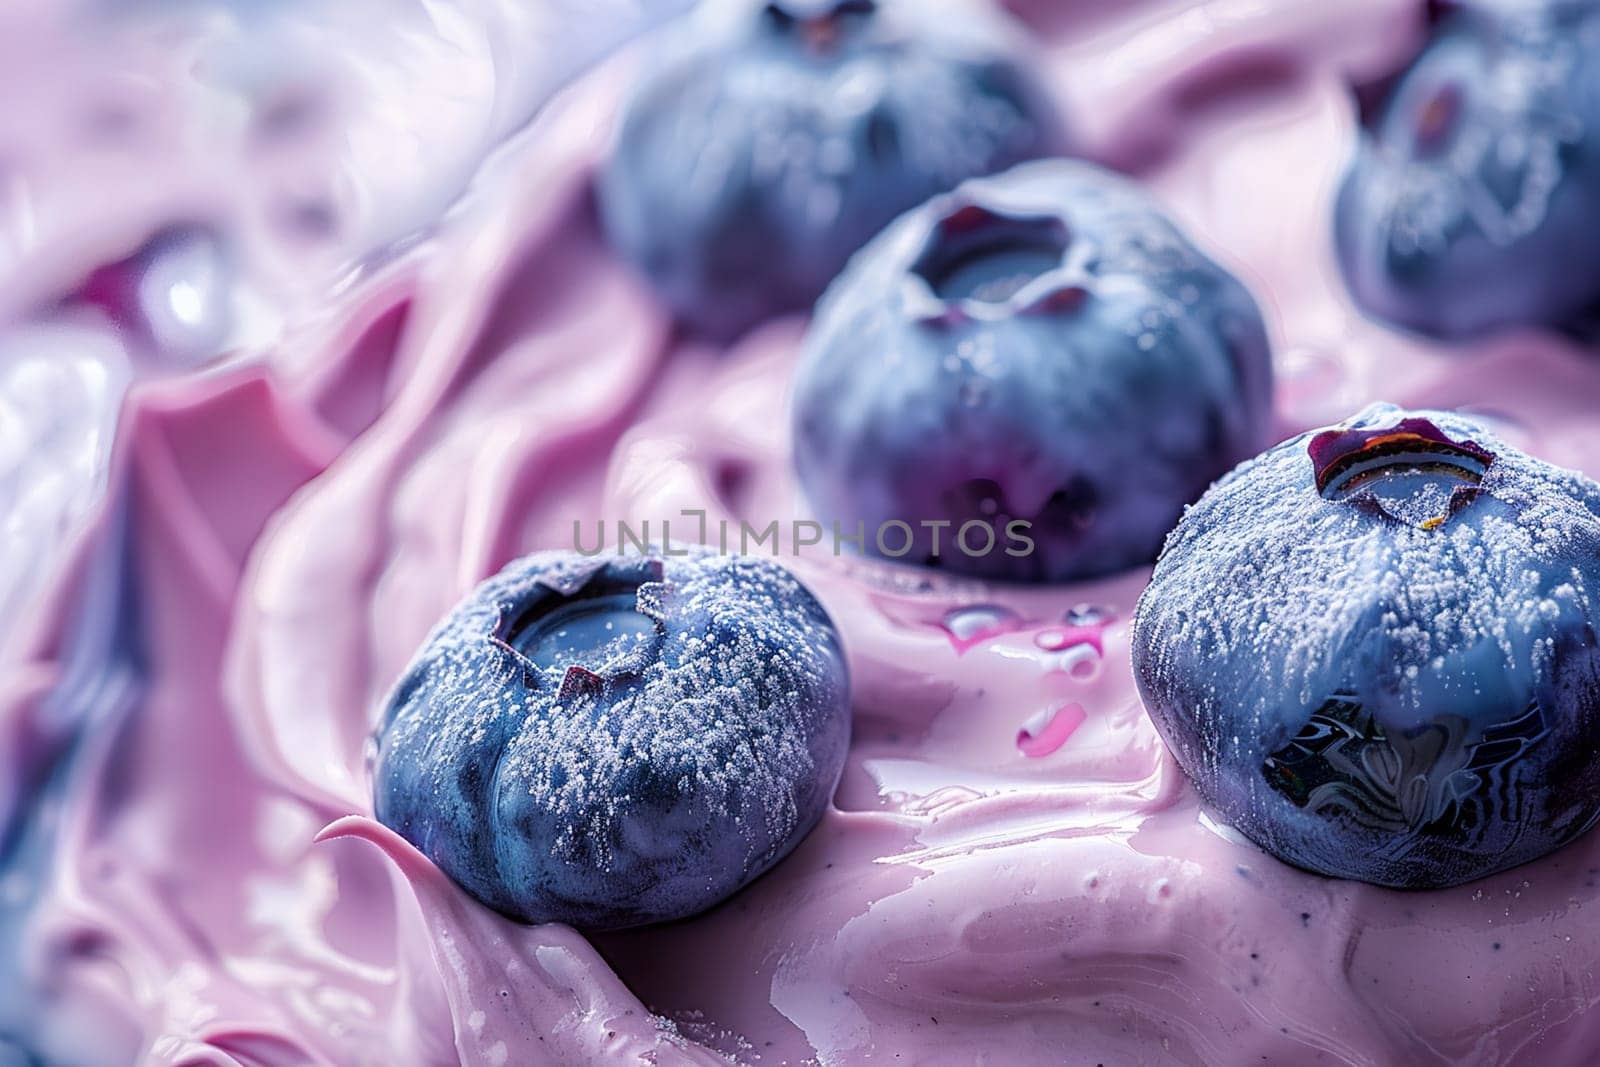 A detailed close-up view of blueberries dusted with sugar and drizzled with syrup on a creamy surface.